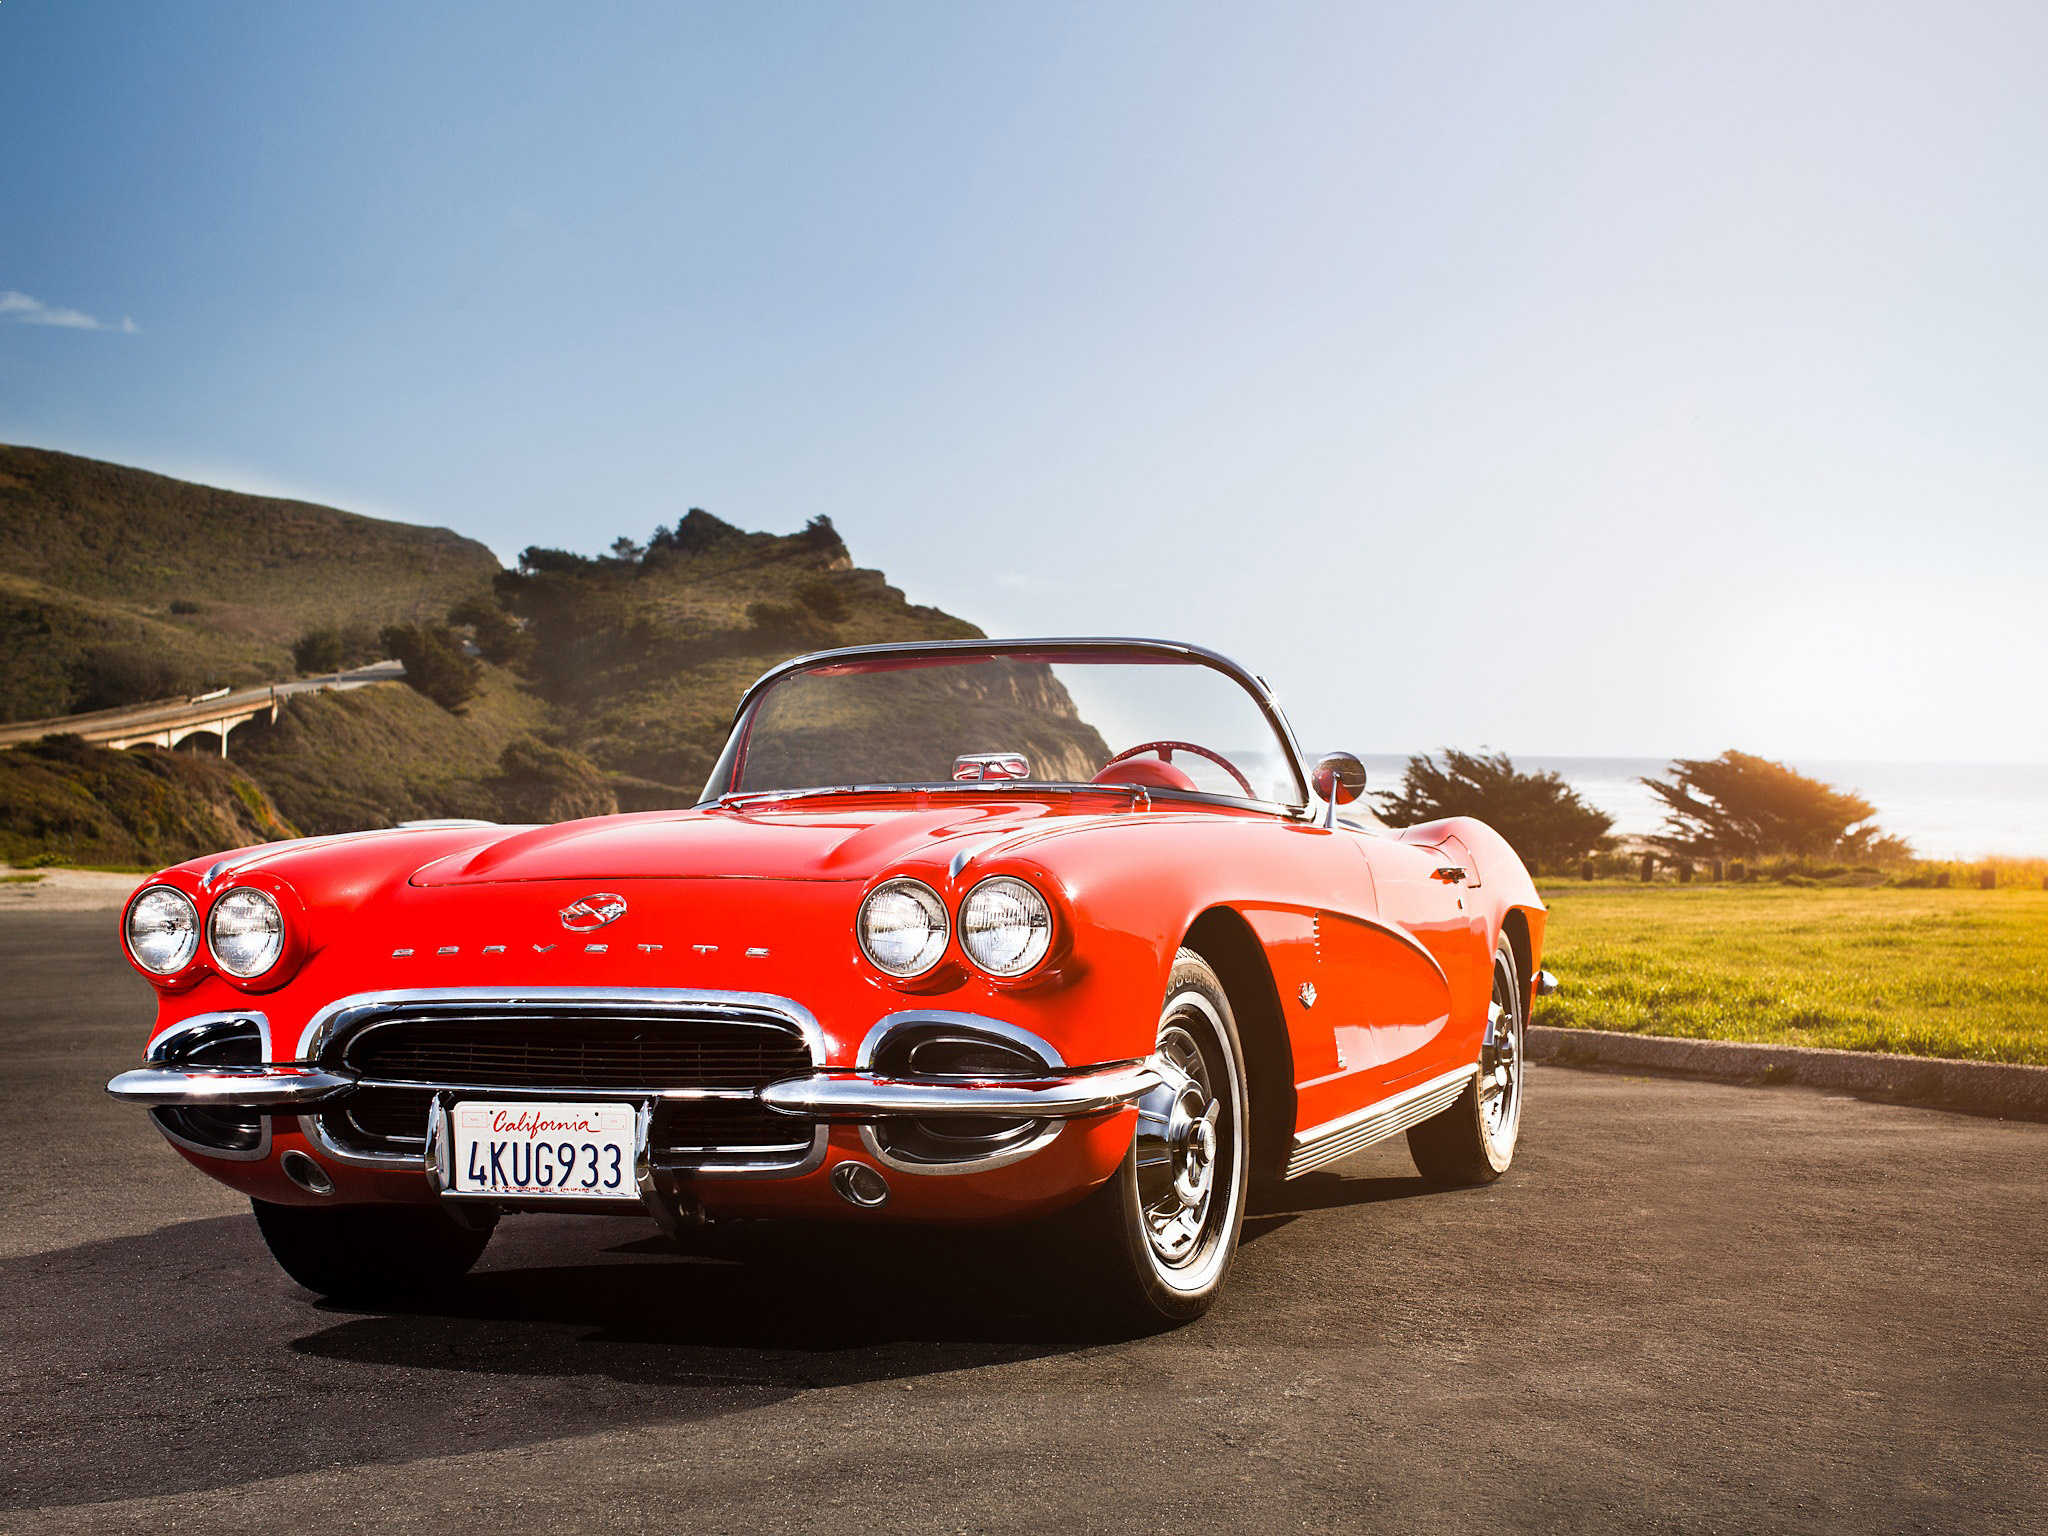 Corvette: 1962 Chevrolet C1, A first generation version with fewer and heavier retro teeth in the grille. 2050x1540 HD Wallpaper.